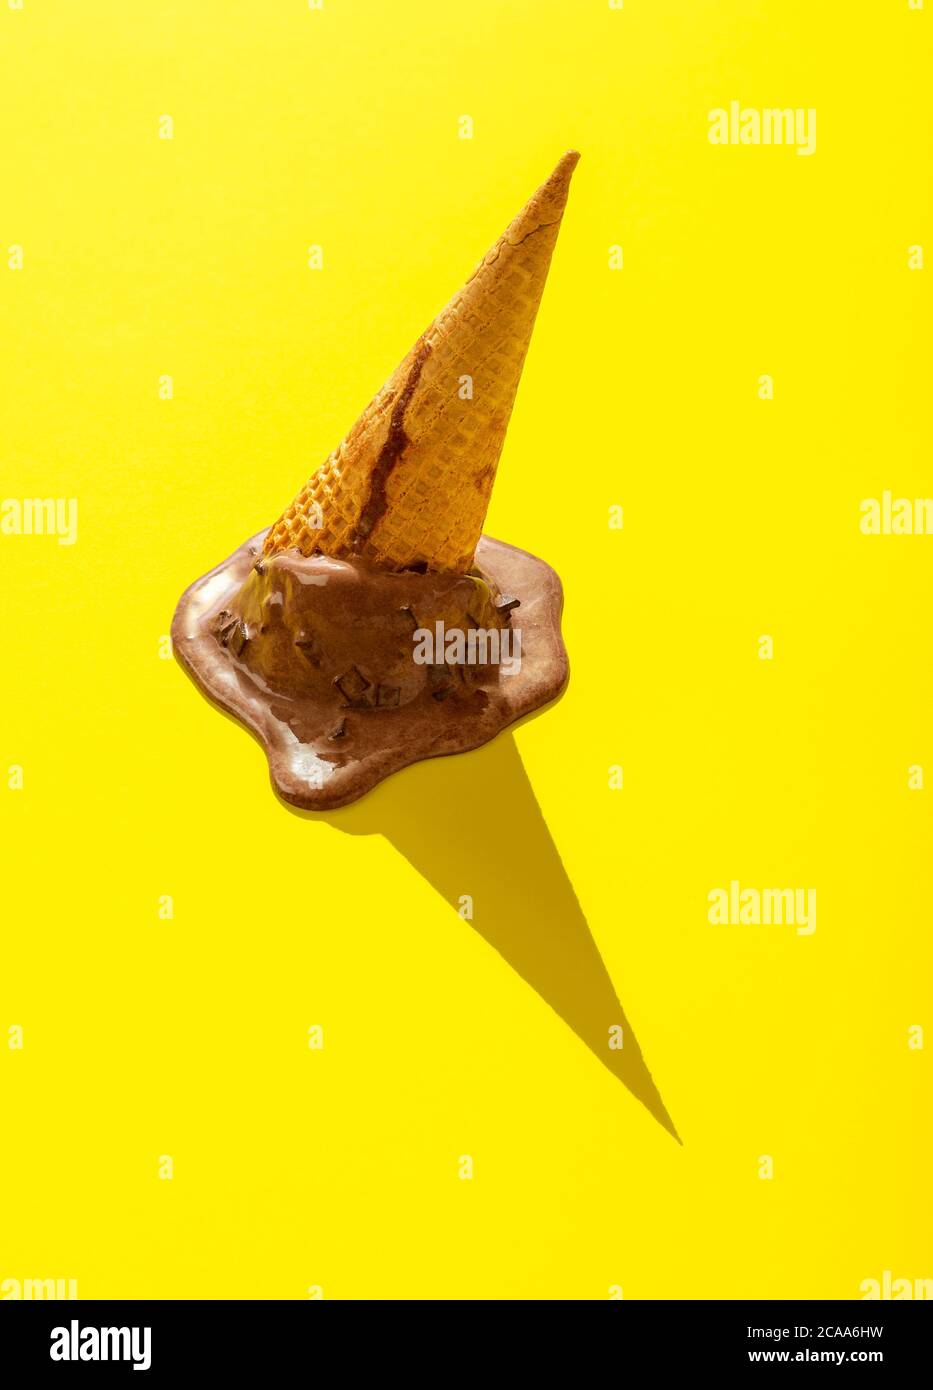 Upside down chocolate ice cream on a yellow background. Melting ice cream in bright light. Waffle cone ice cream isolated on a yellow-colored backgrou Stock Photo